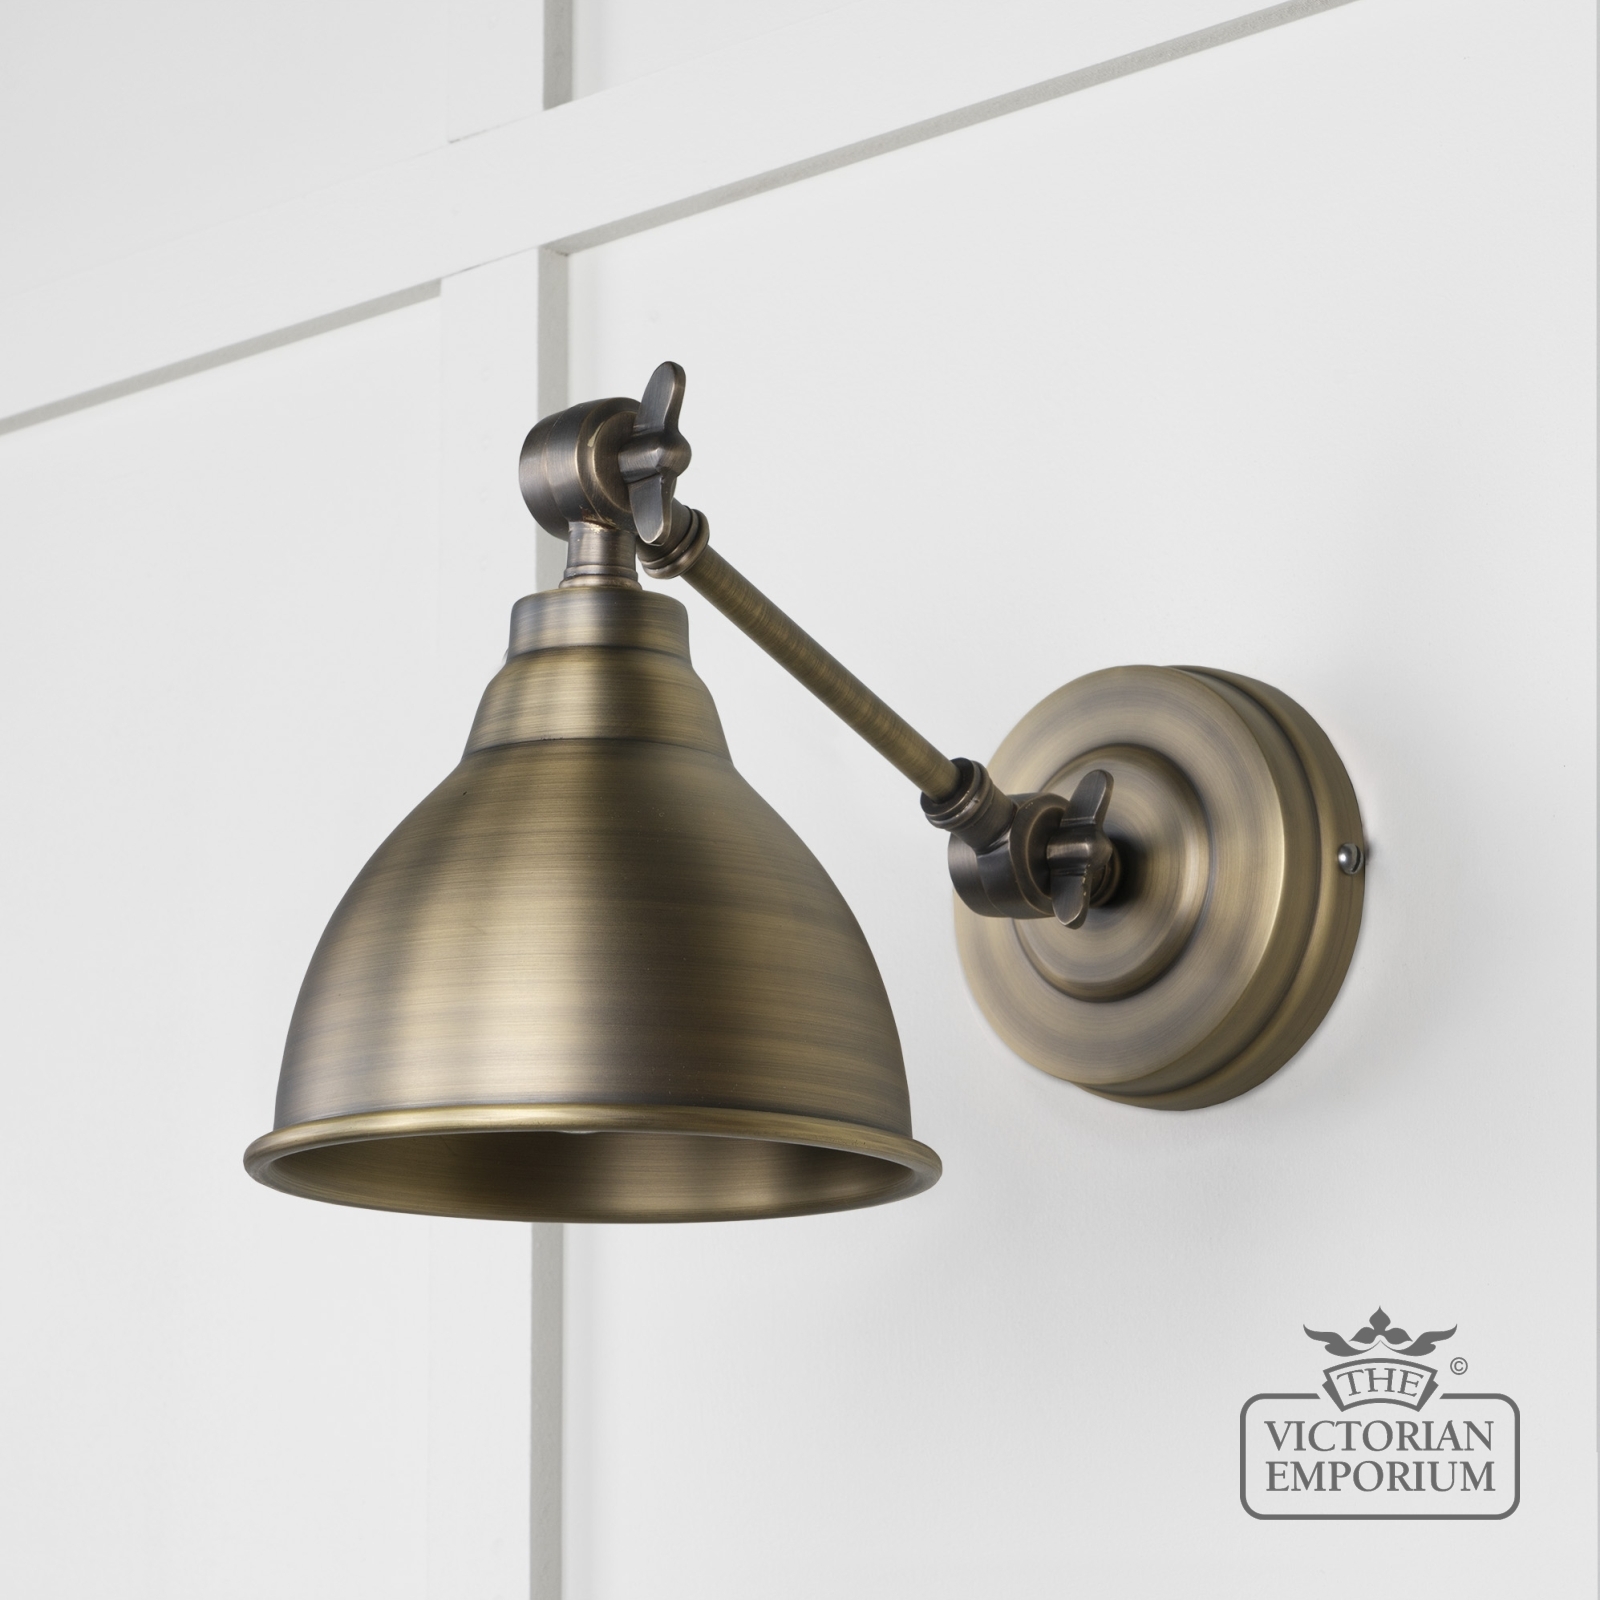 Brindle Wall Light in Aged Brass